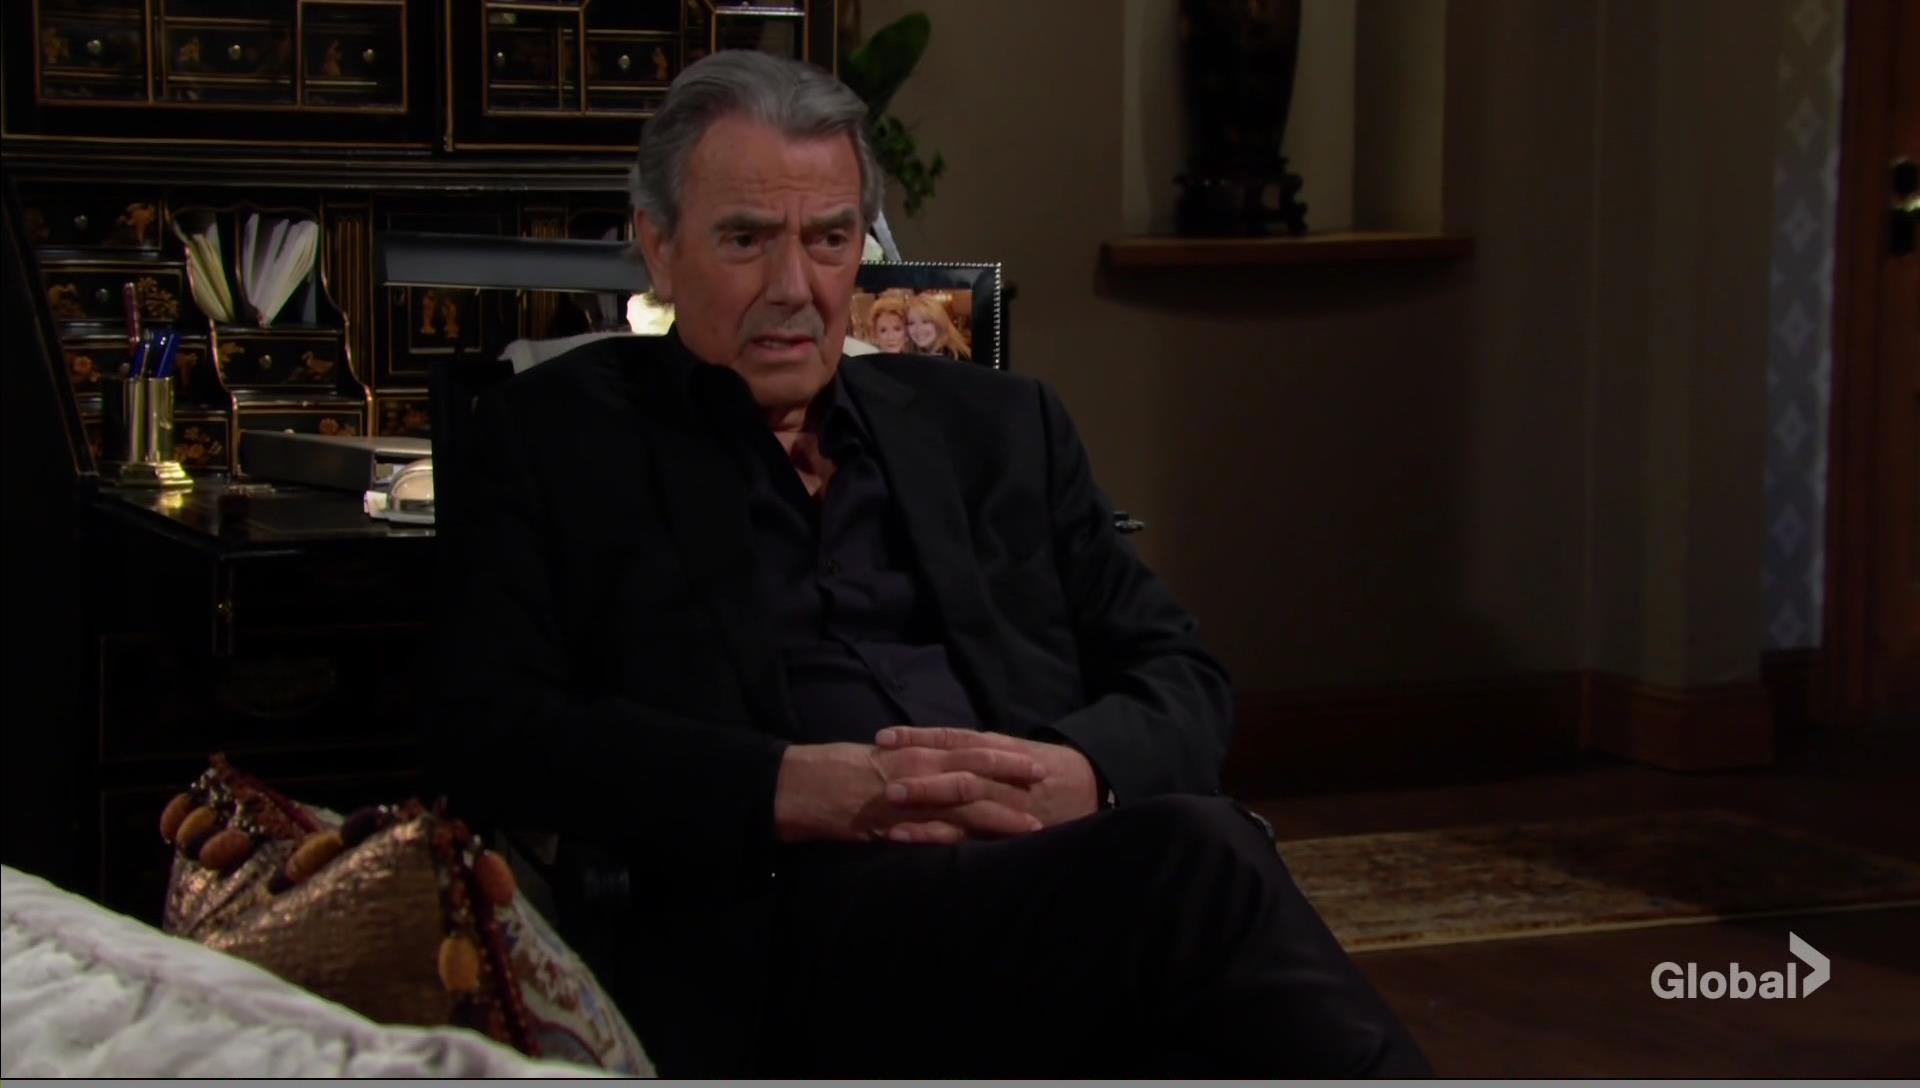 victor wants to help adam young and the restless